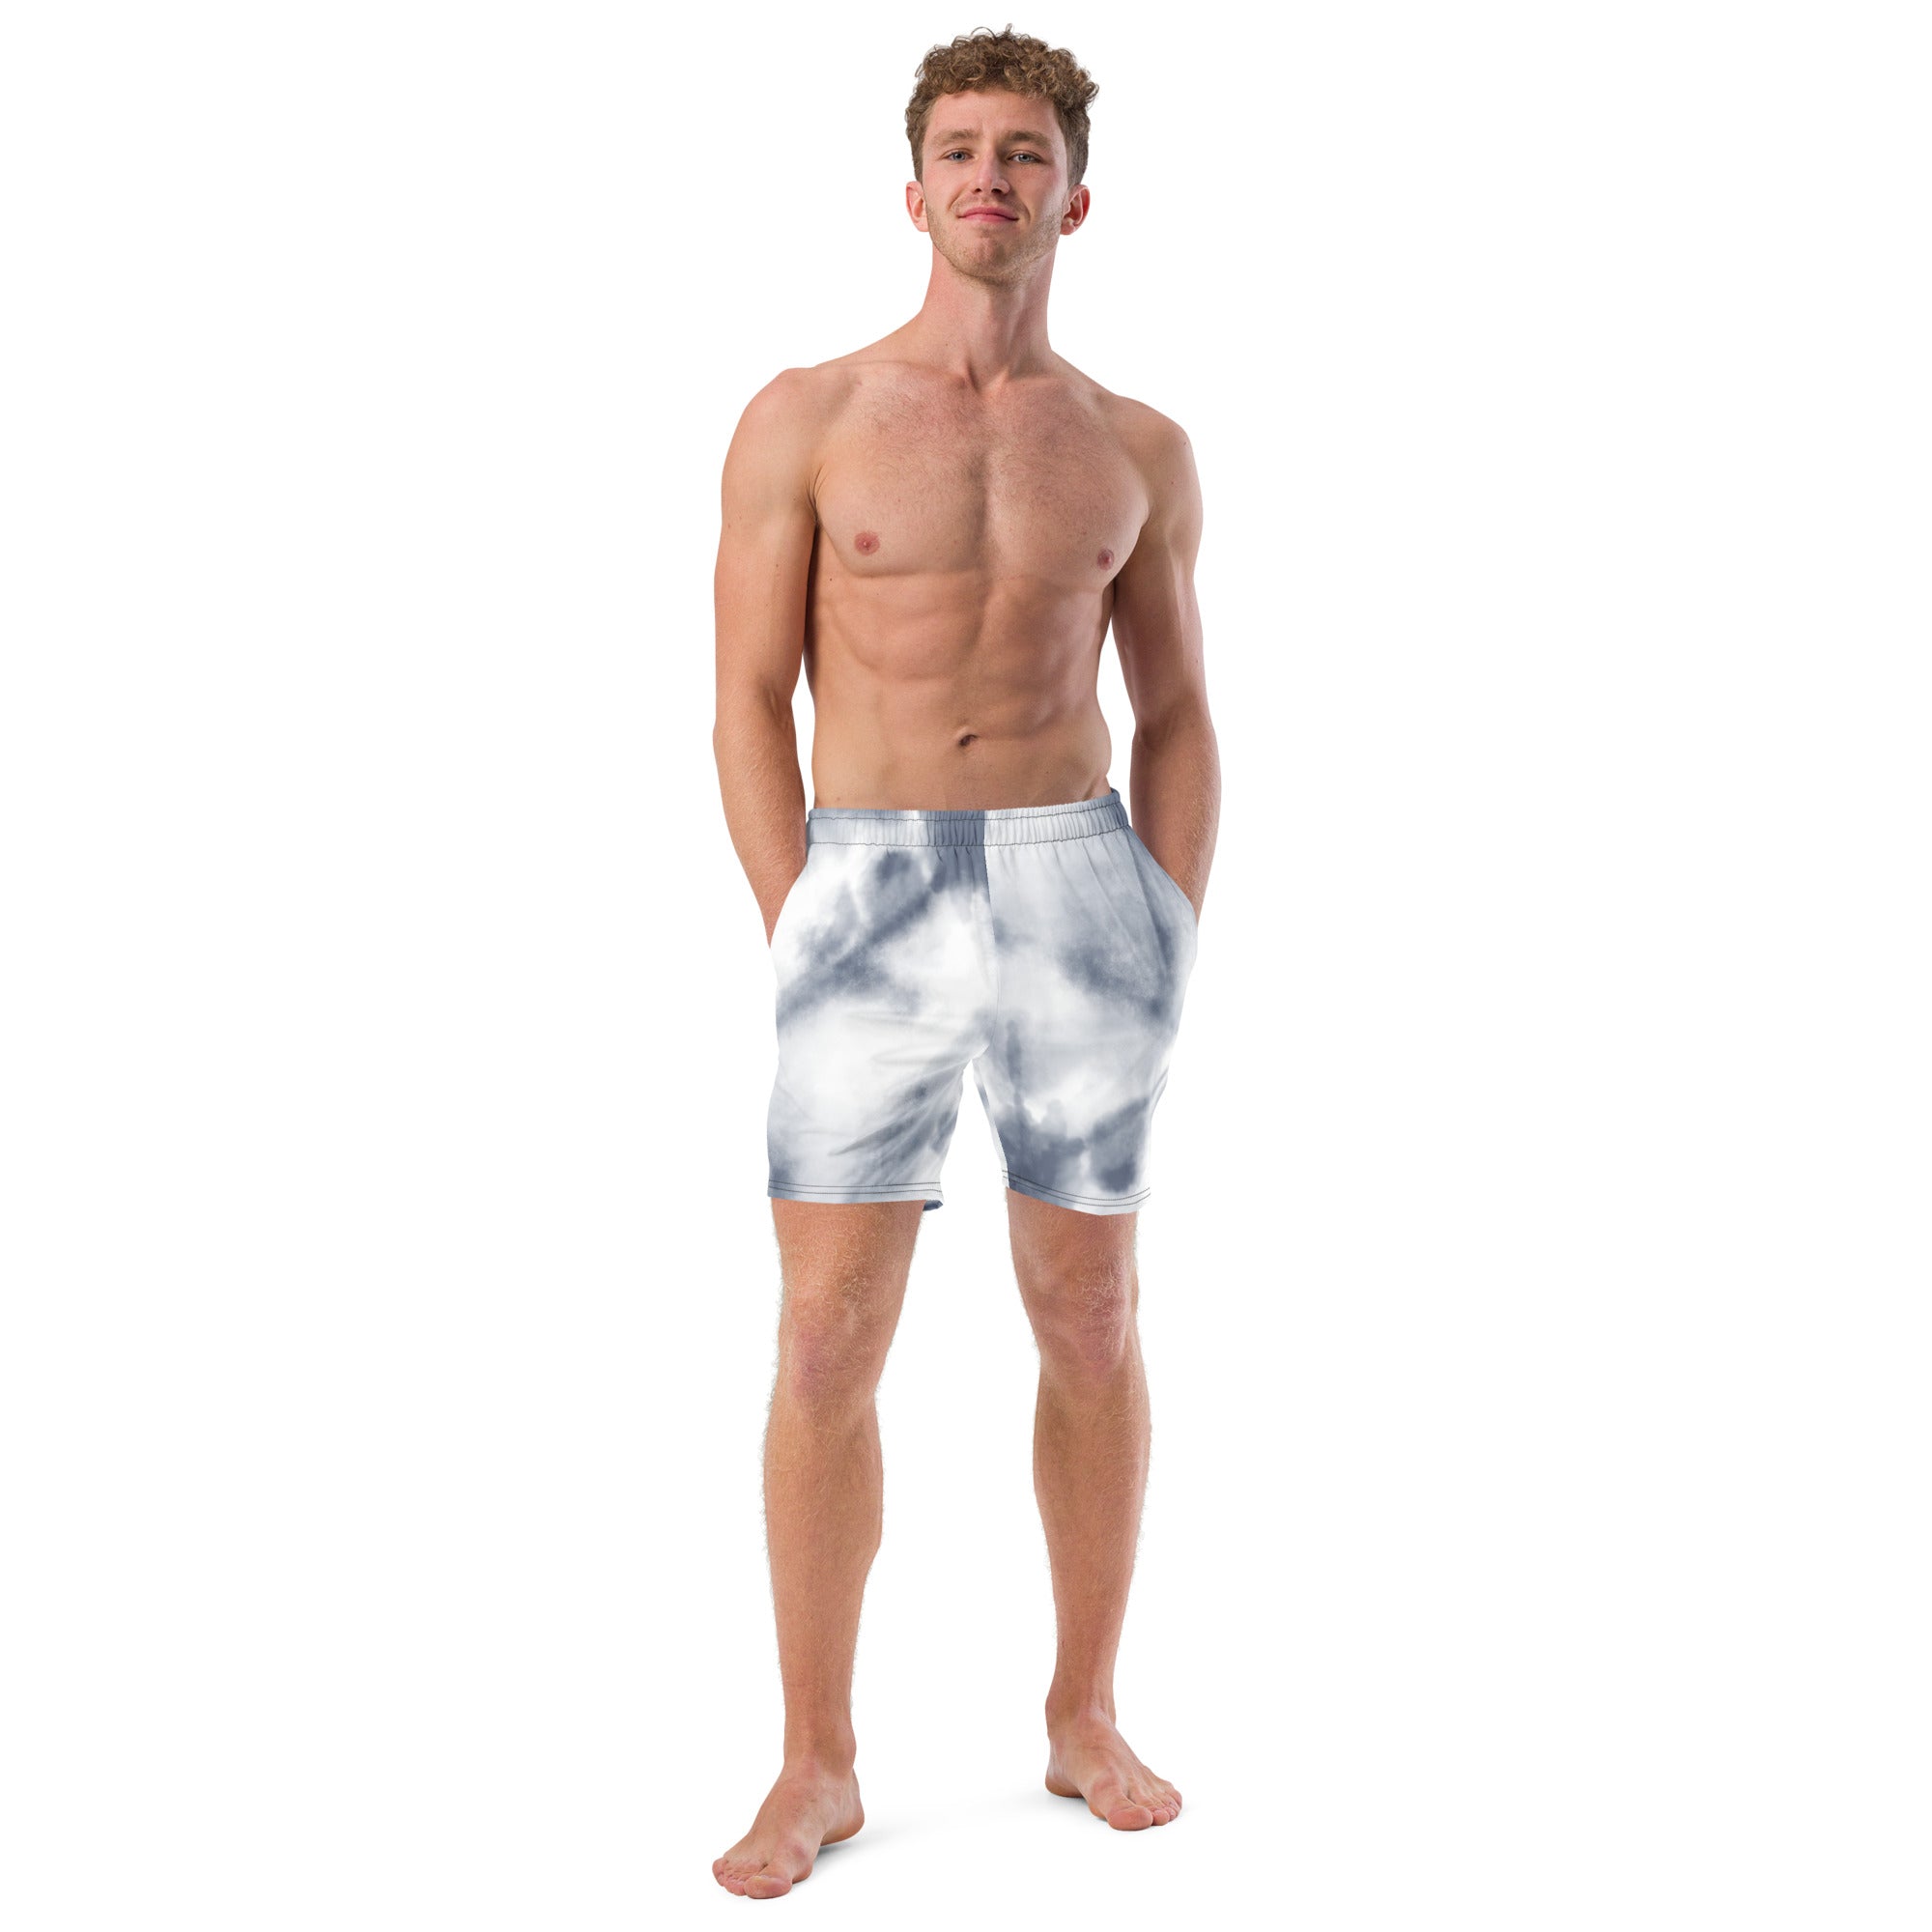 Grey Abstract Men's Swimwear, Grey Abstract Best Comfortable Men's Luxury Premium Swim Trunks With Mesh Pockets UPF 50+ For Men - Made in USA/EU/MX (US Size: 2XS-6XL) Men's Abstract Print Swimming Trunks, Colorful Swim Trunks Abstract, Abstract Swim Trunks, Abstract Swimwear For Men